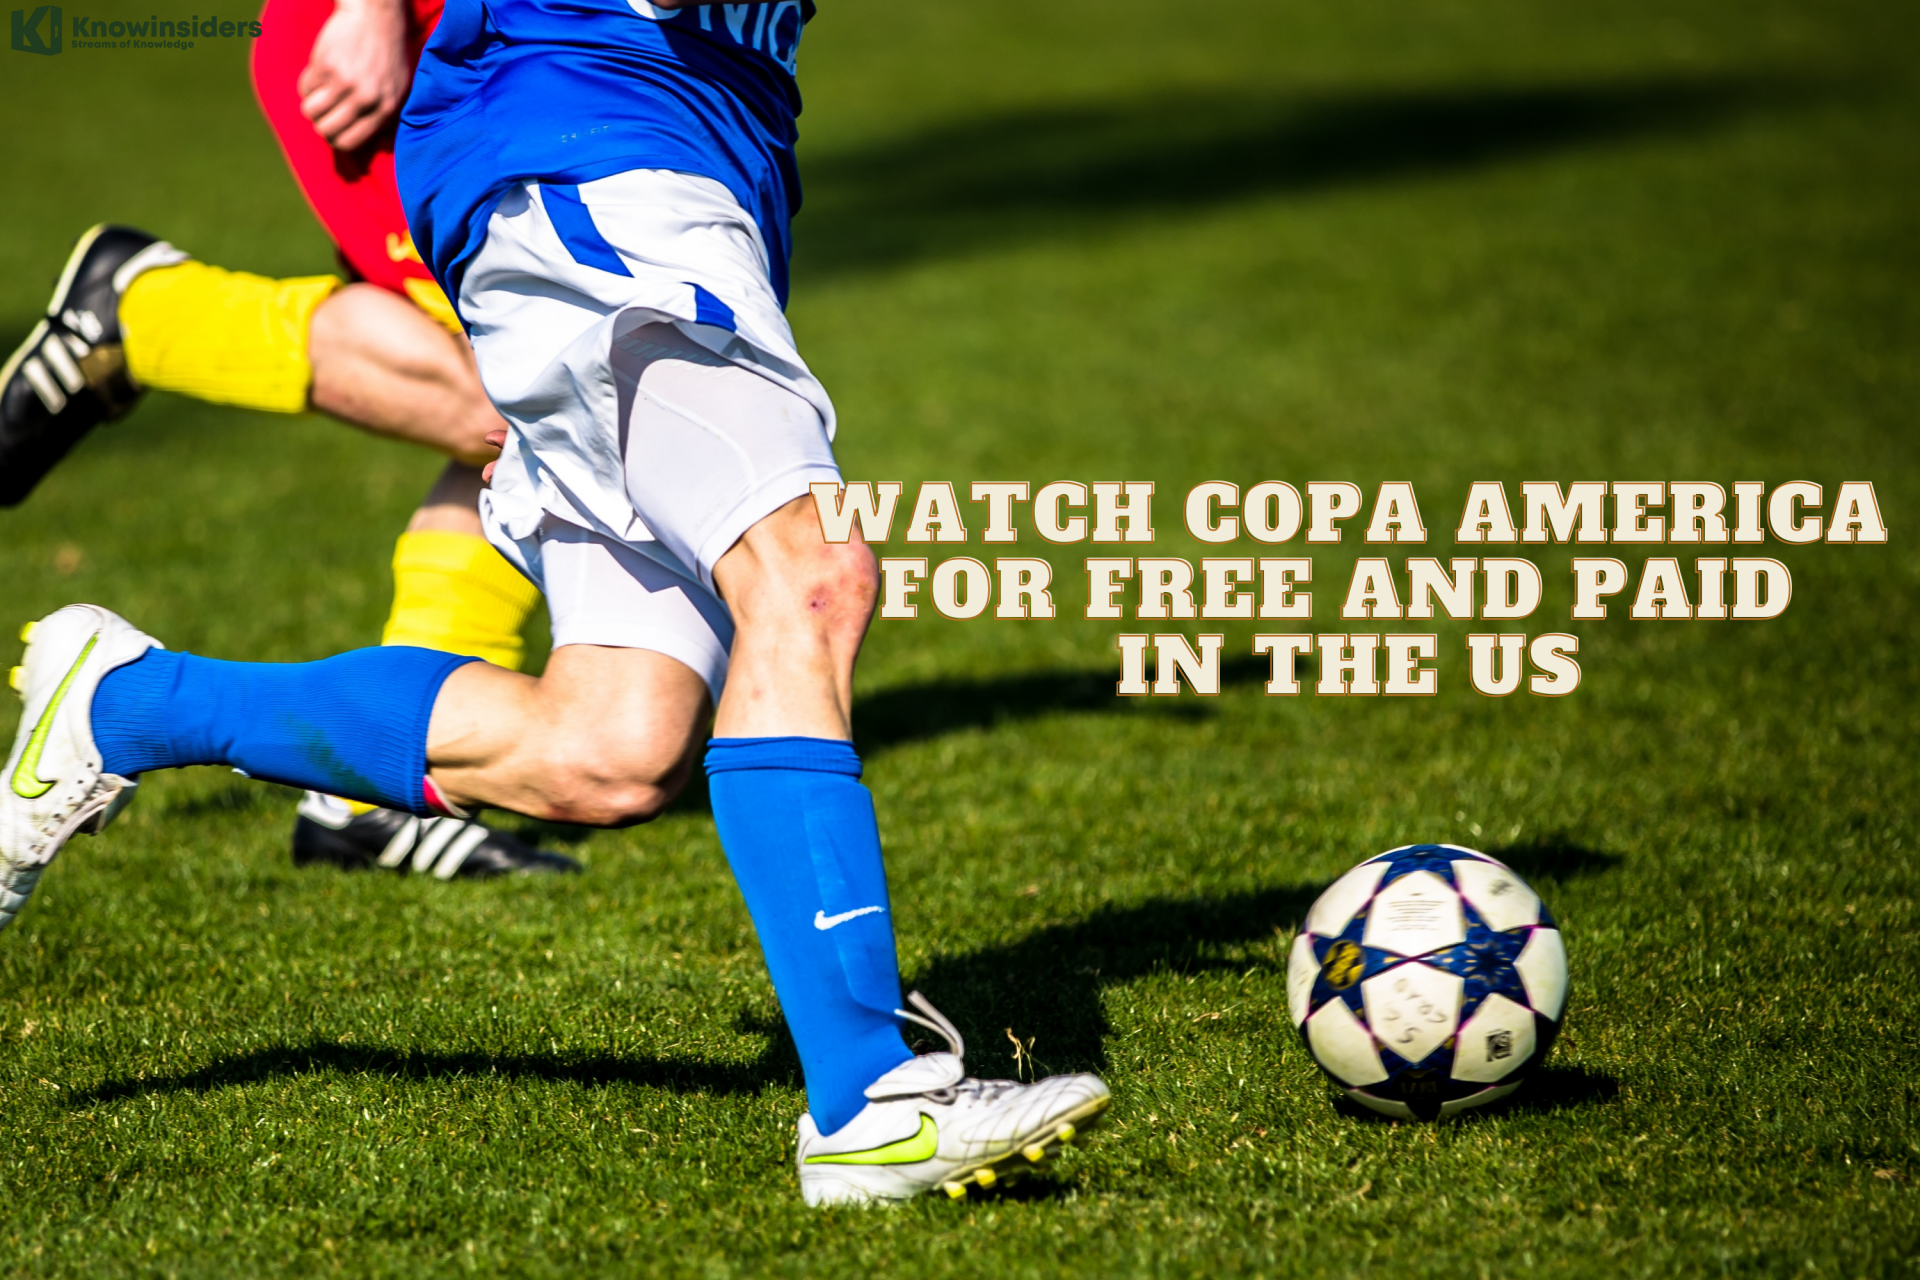 Watch Copa America in US for Free and Paid